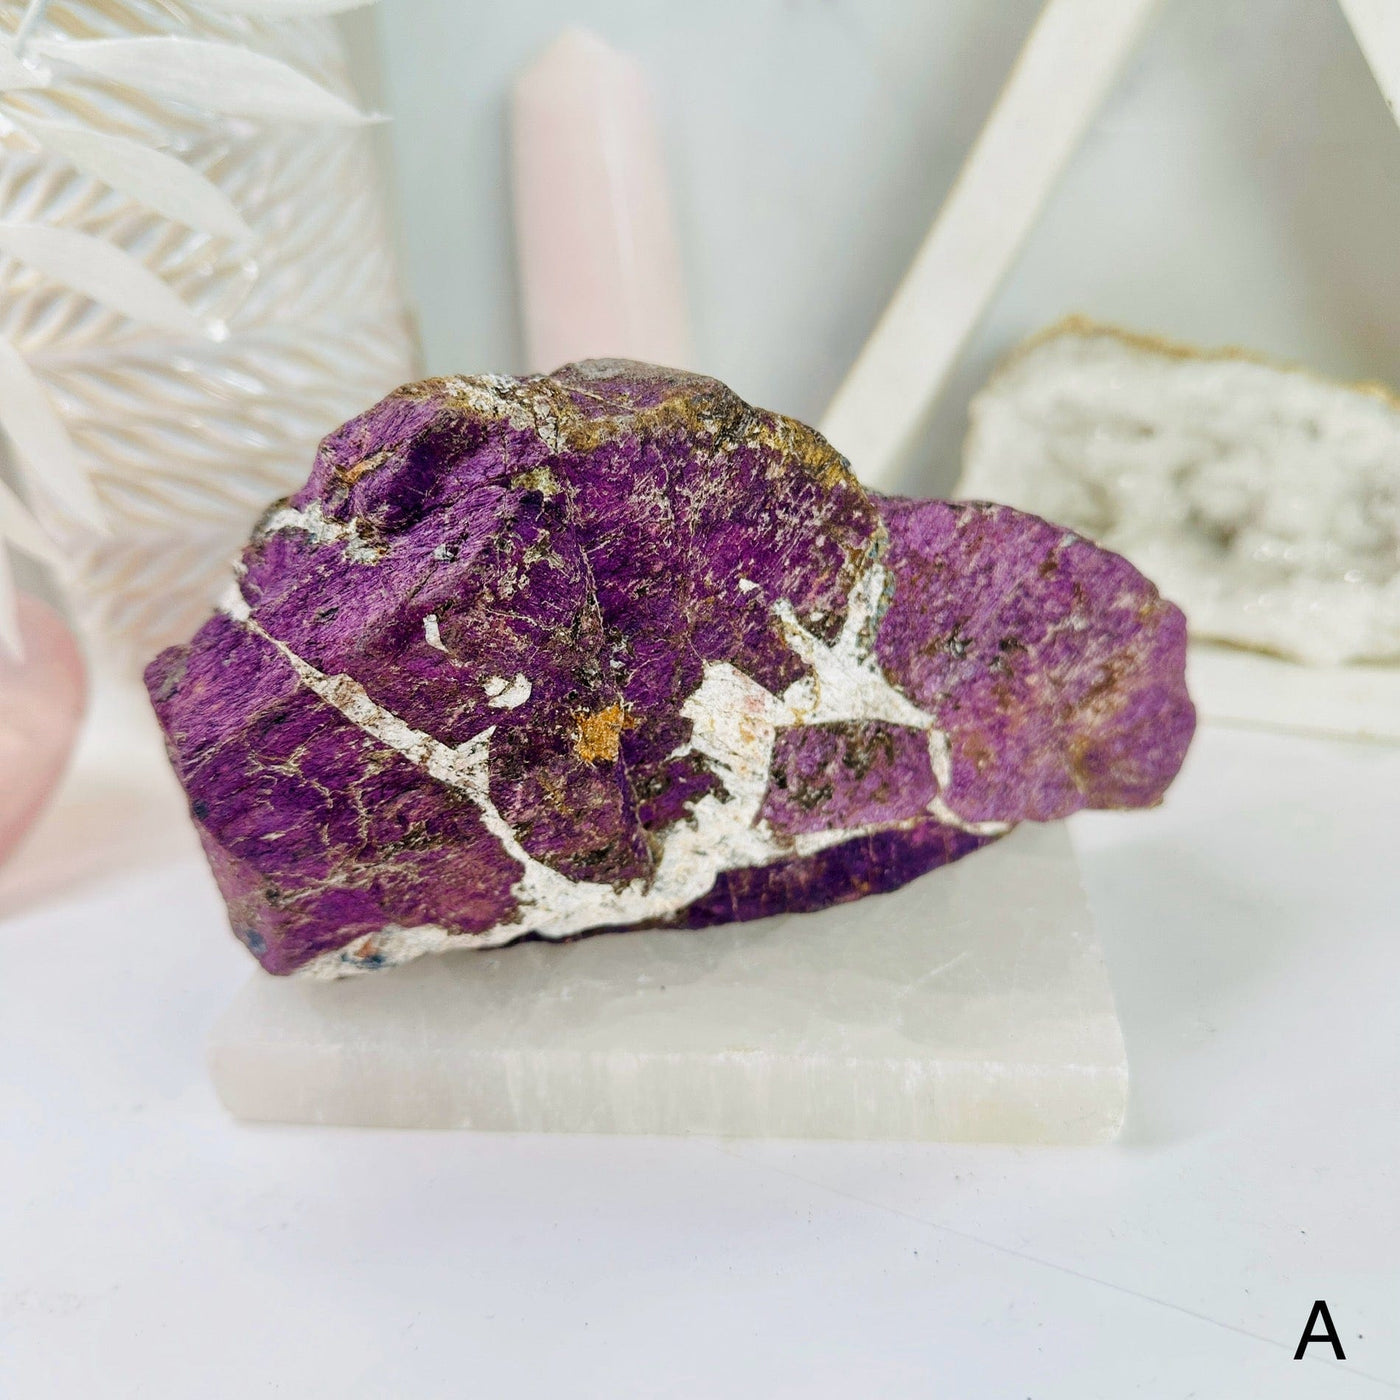 Purpurite Crystal - Rough Stone - YOU CHOOSE variant A labeled